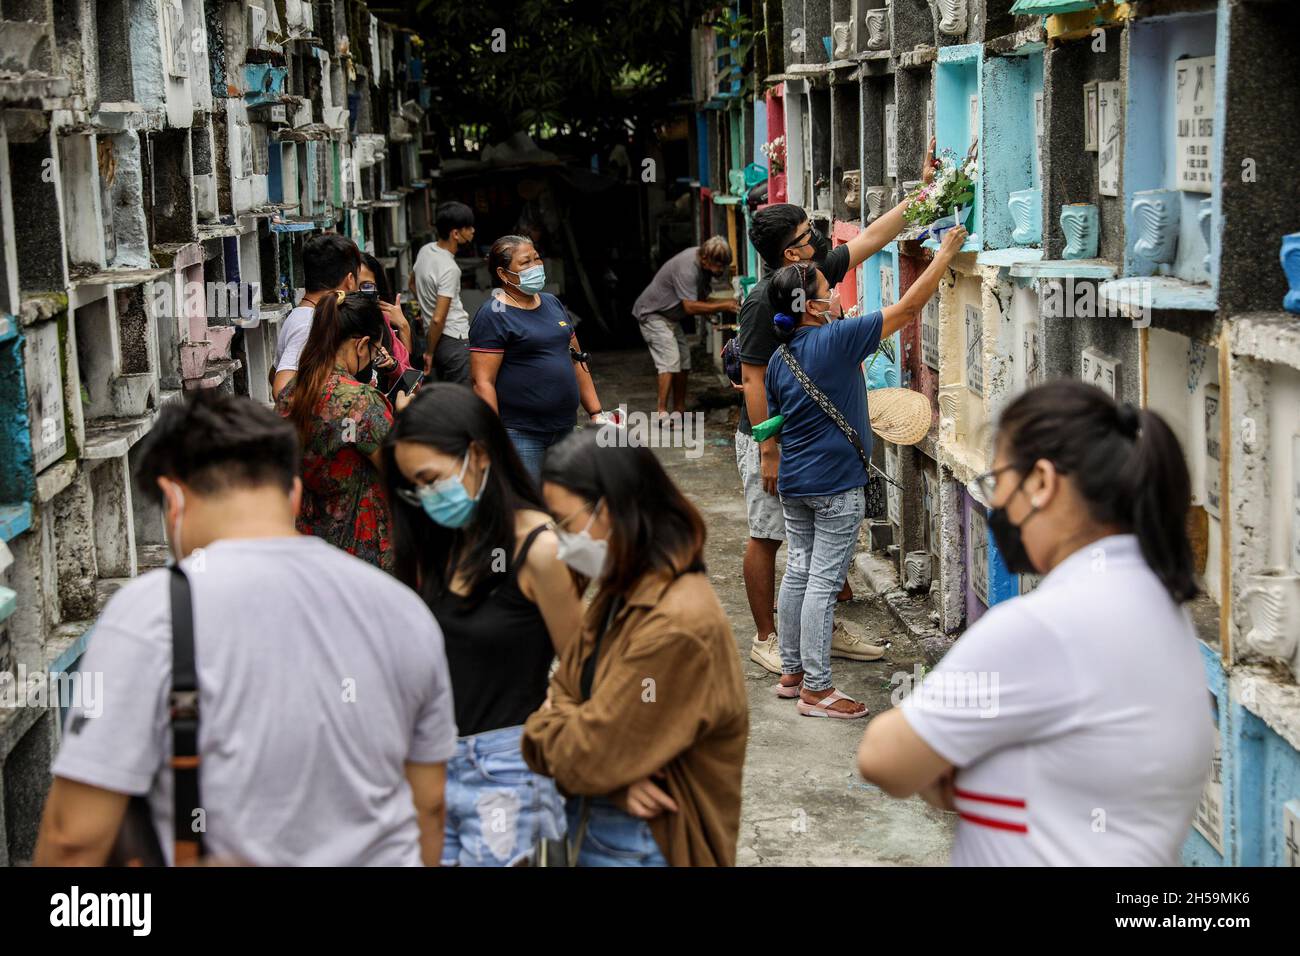 People visit their departed loved ones in observance of All Souls’ Day inside a public cemetery. Quezon City, Metro Manila, Philippines. Stock Photo